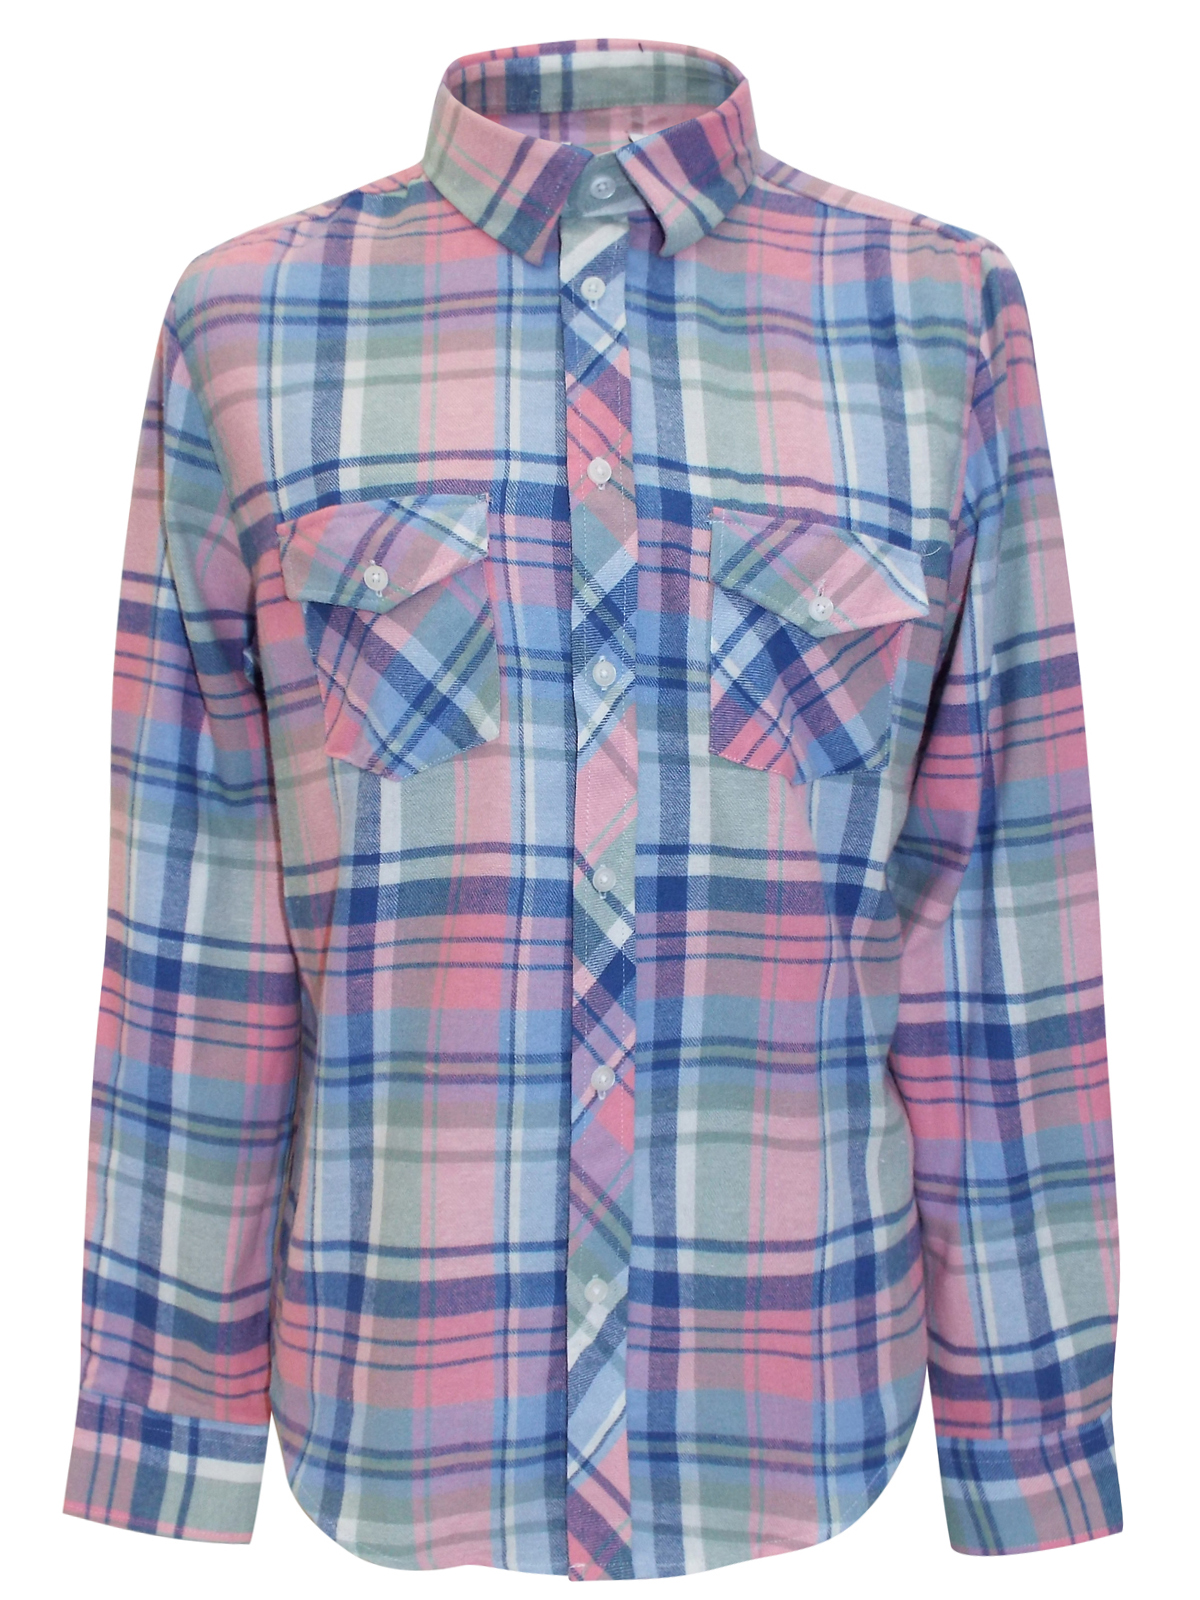 N3XT PINK Brushed Cotton Checked Long Sleeve Shirt - Size Small to XXLarge